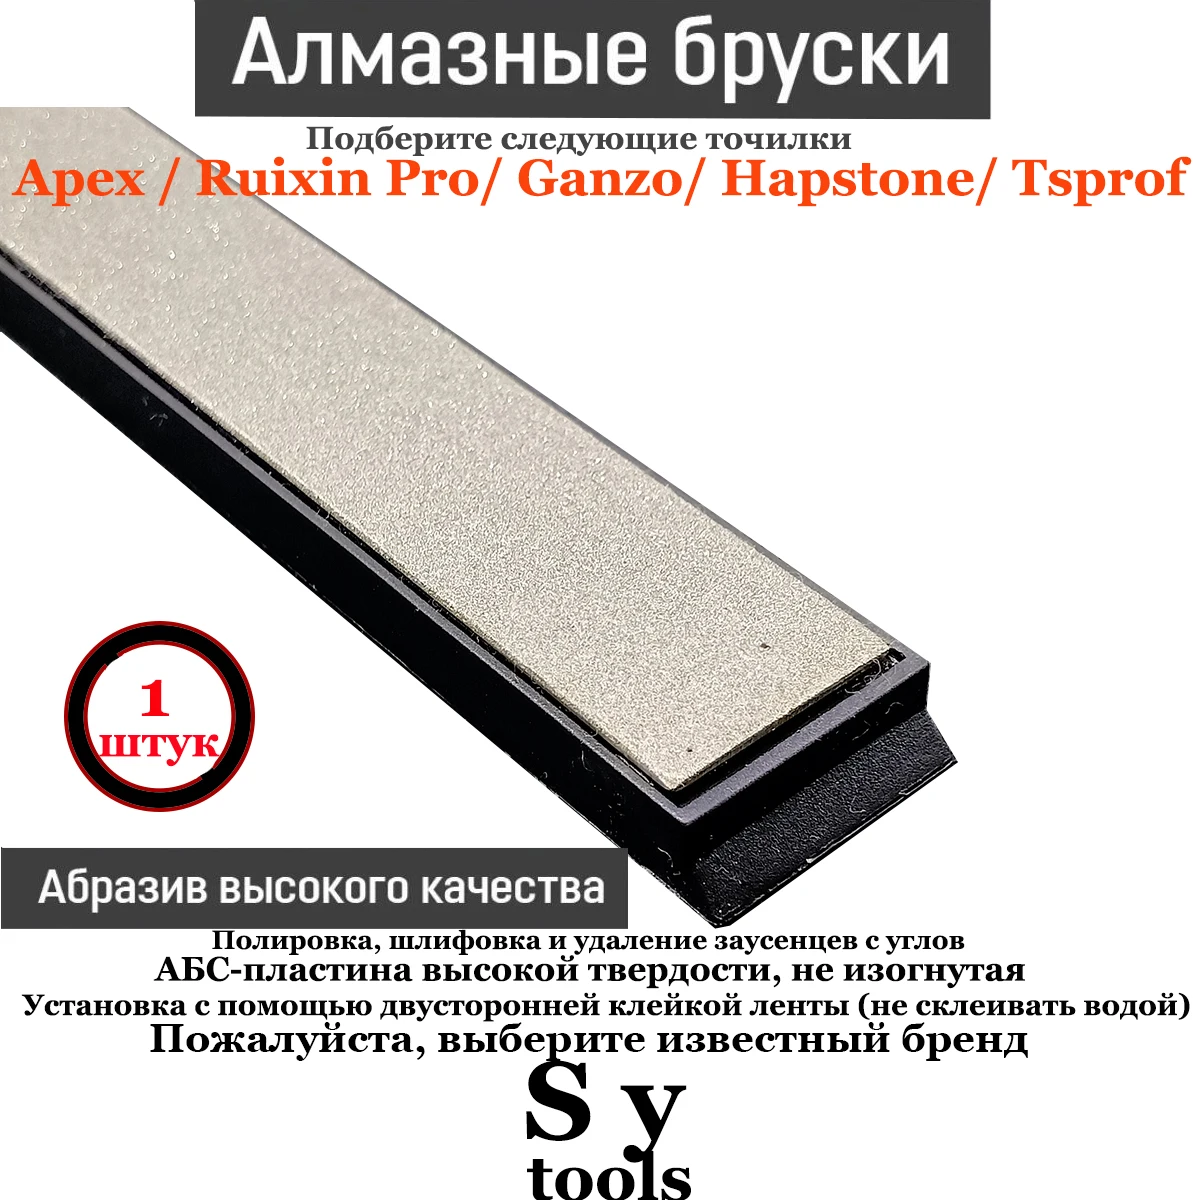 

Free shipping from Moscow warehouse more than 1300rubs 80#-3000# Diamond bar whetstone match Ruixin pro RX008 knife sharpener